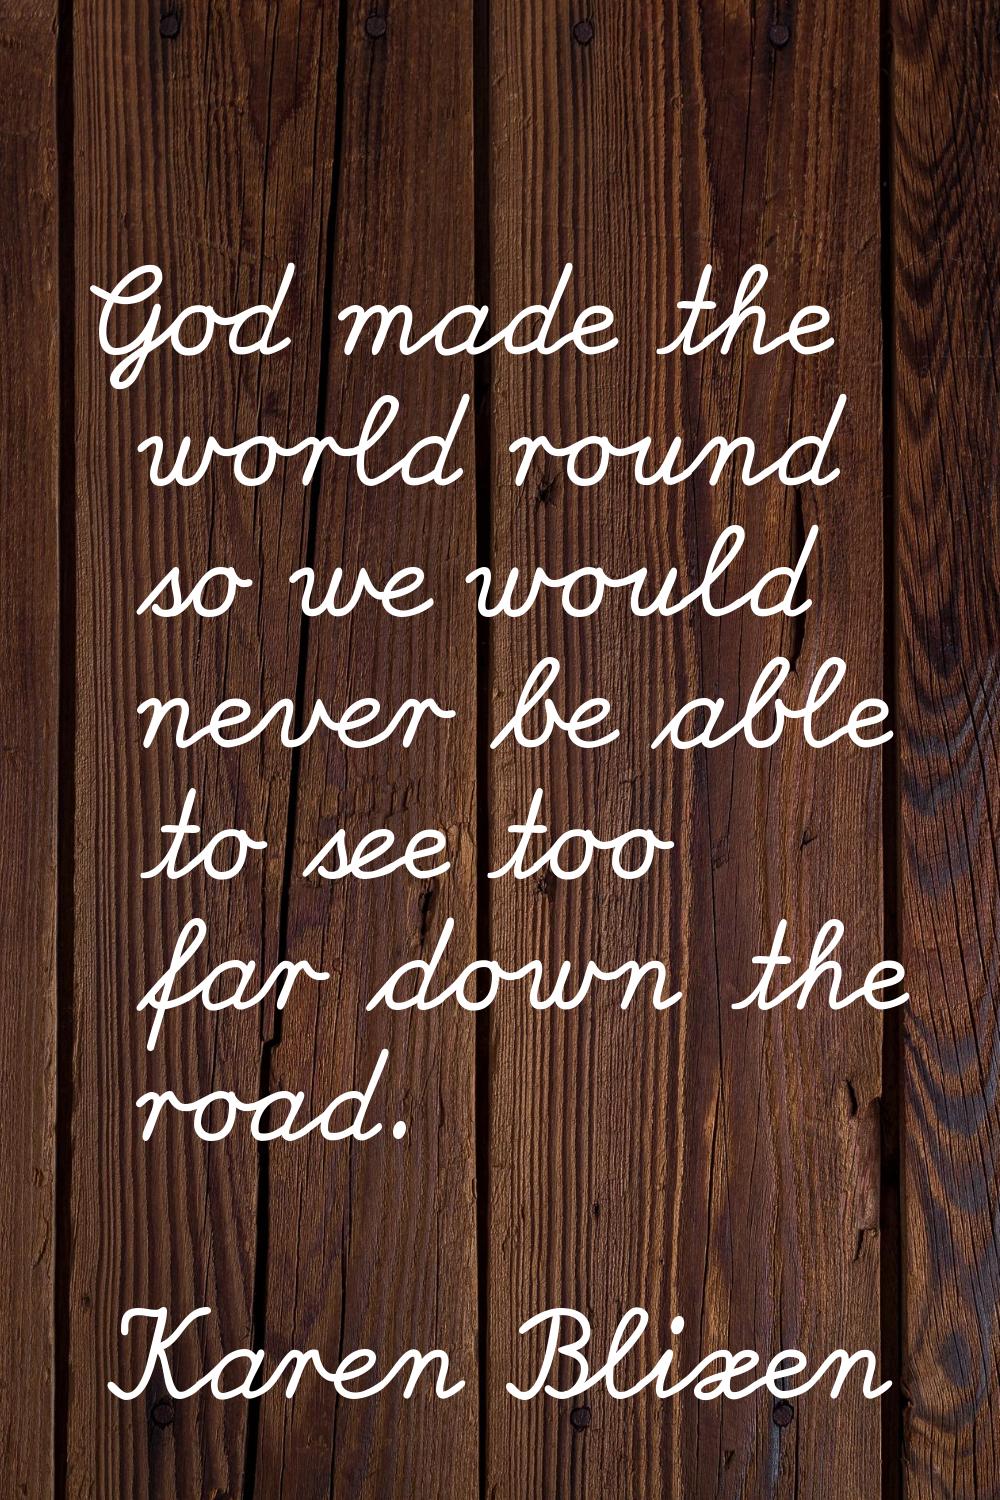 God made the world round so we would never be able to see too far down the road.